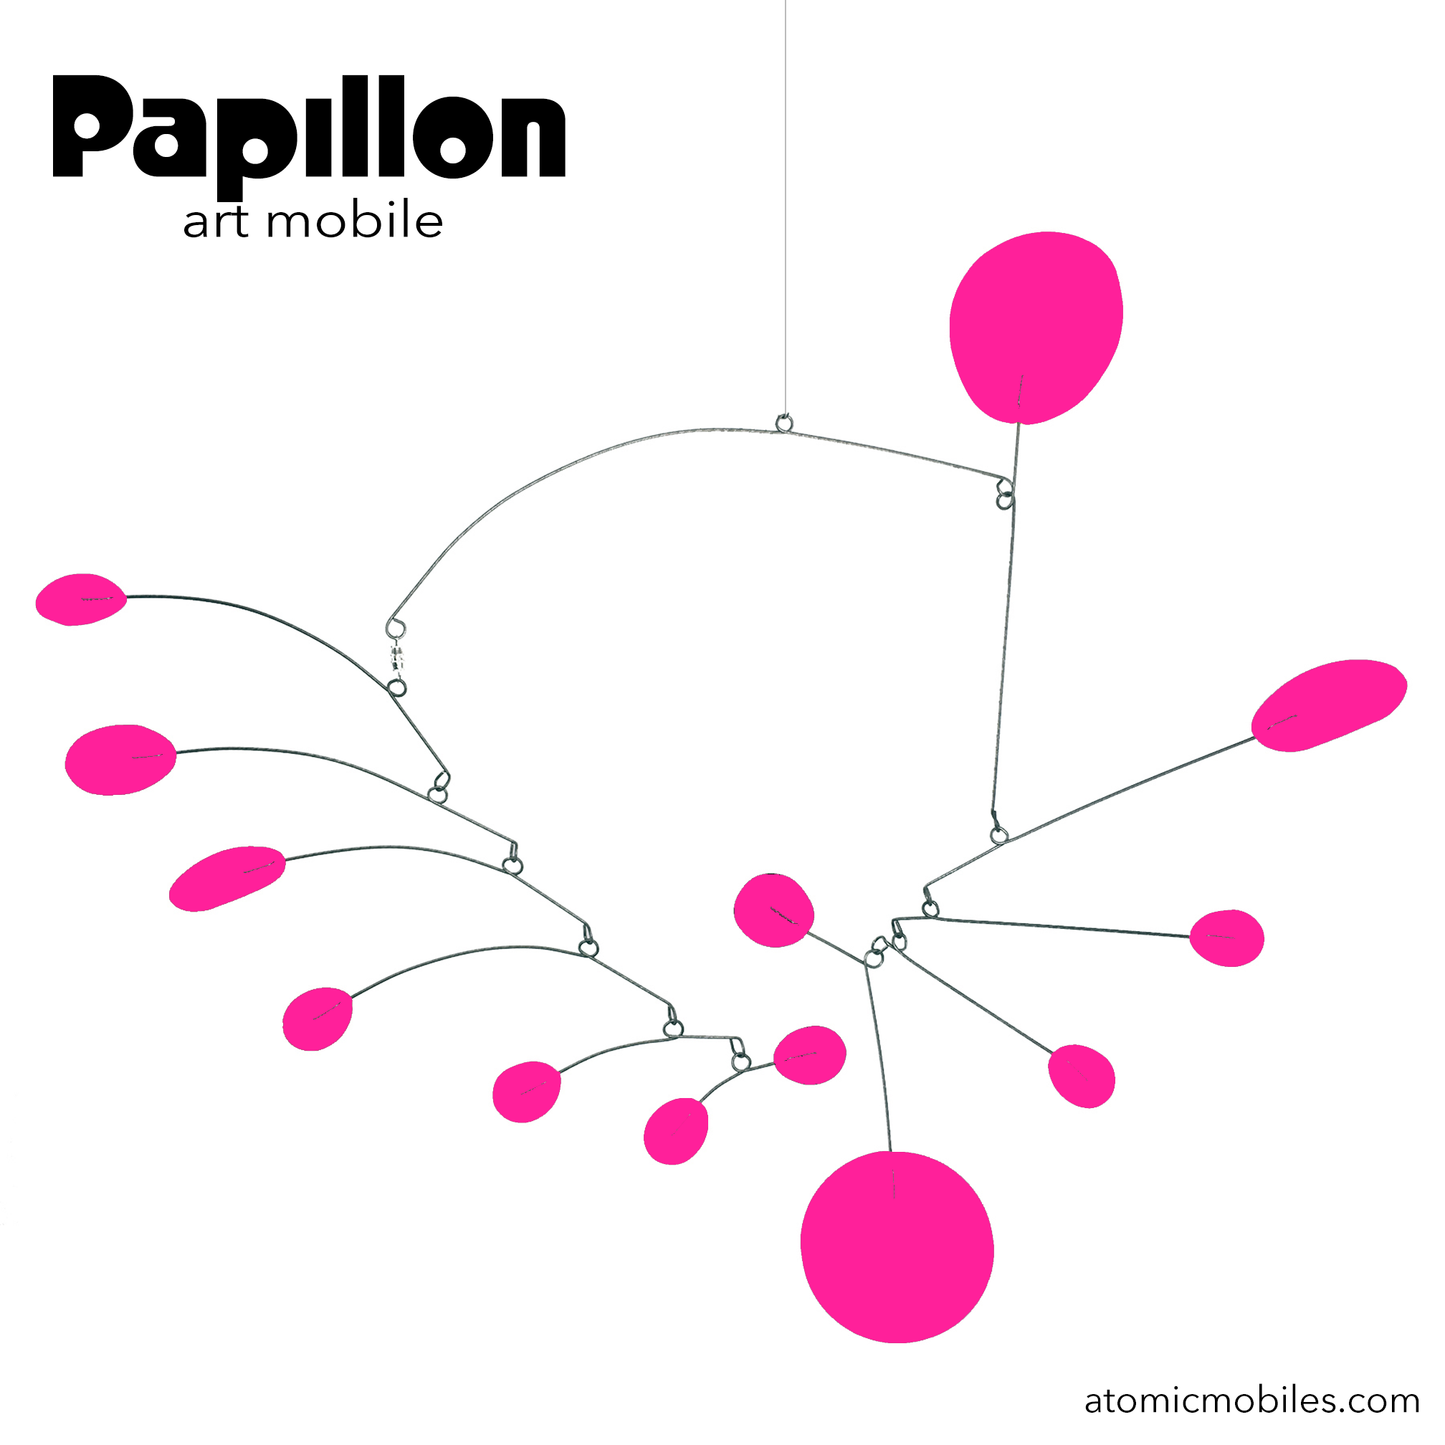 Papillon kinetic art mobile in Intense Hot Barbie Dream House Pink - hanging art mobile in MOD mid century modern style for your Barbiecore home decor by AtomicMobiles.com